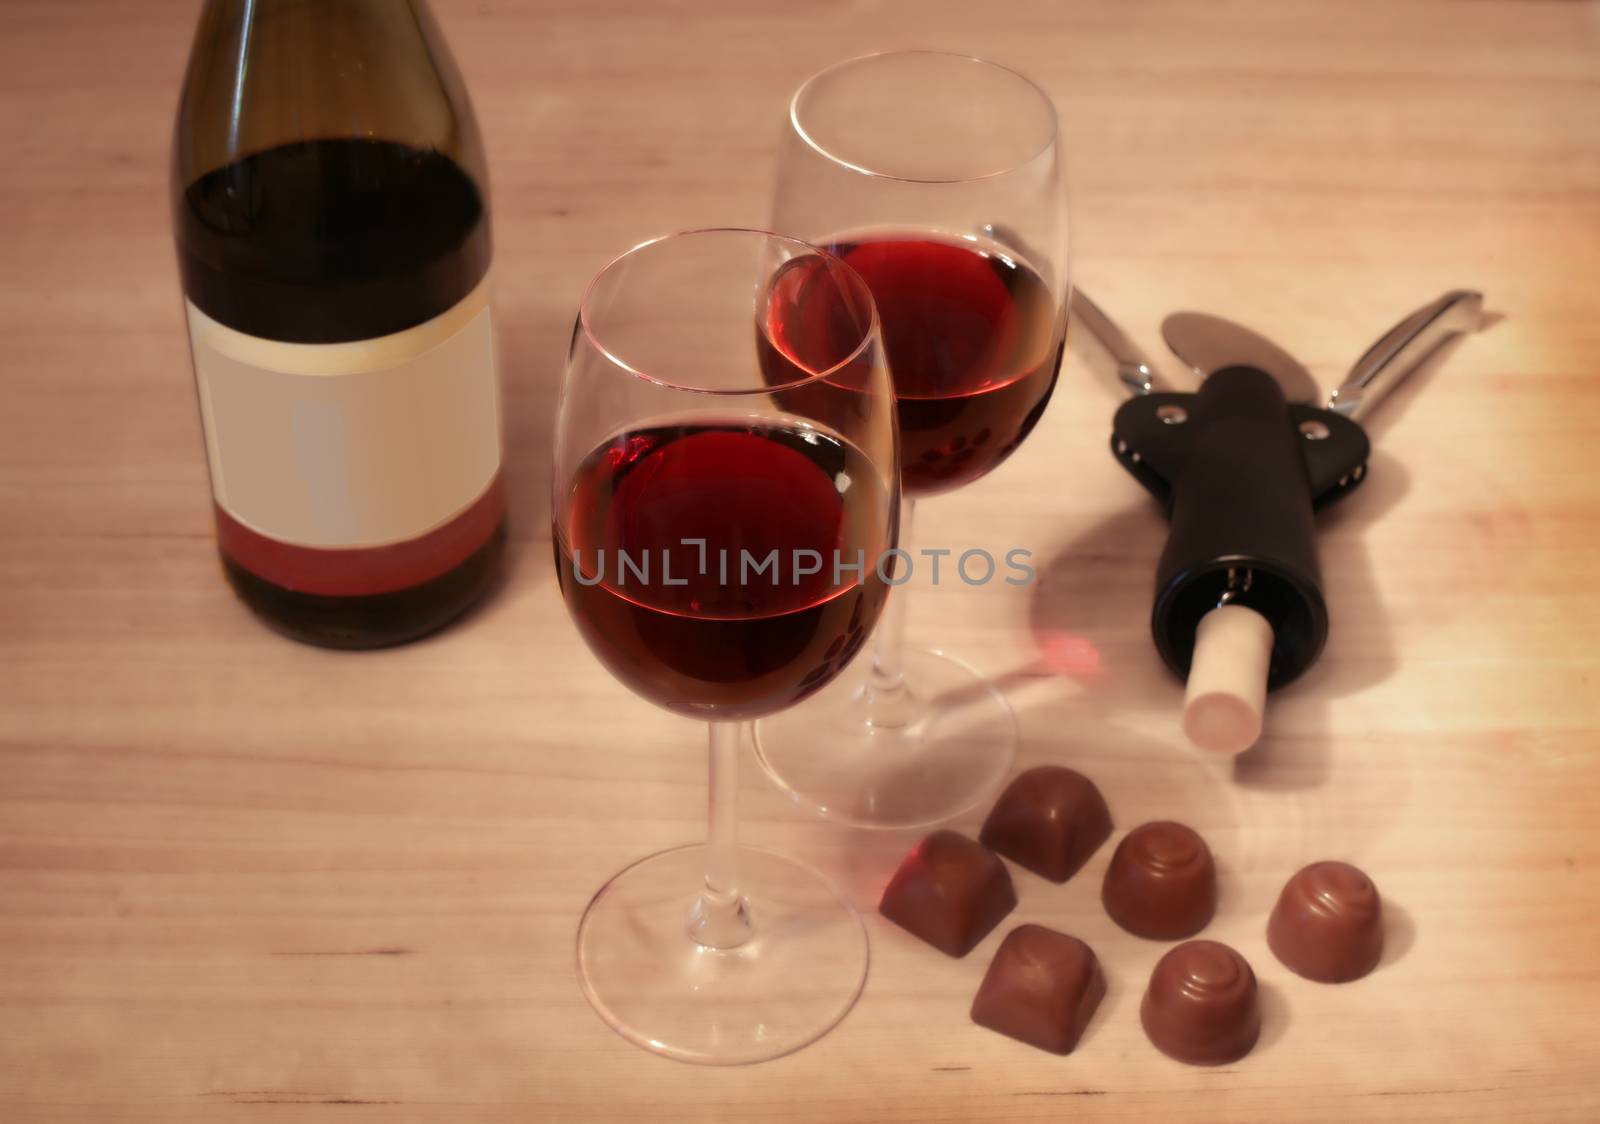 Two glasses of wine, bottle corkscrew and chocolate on table